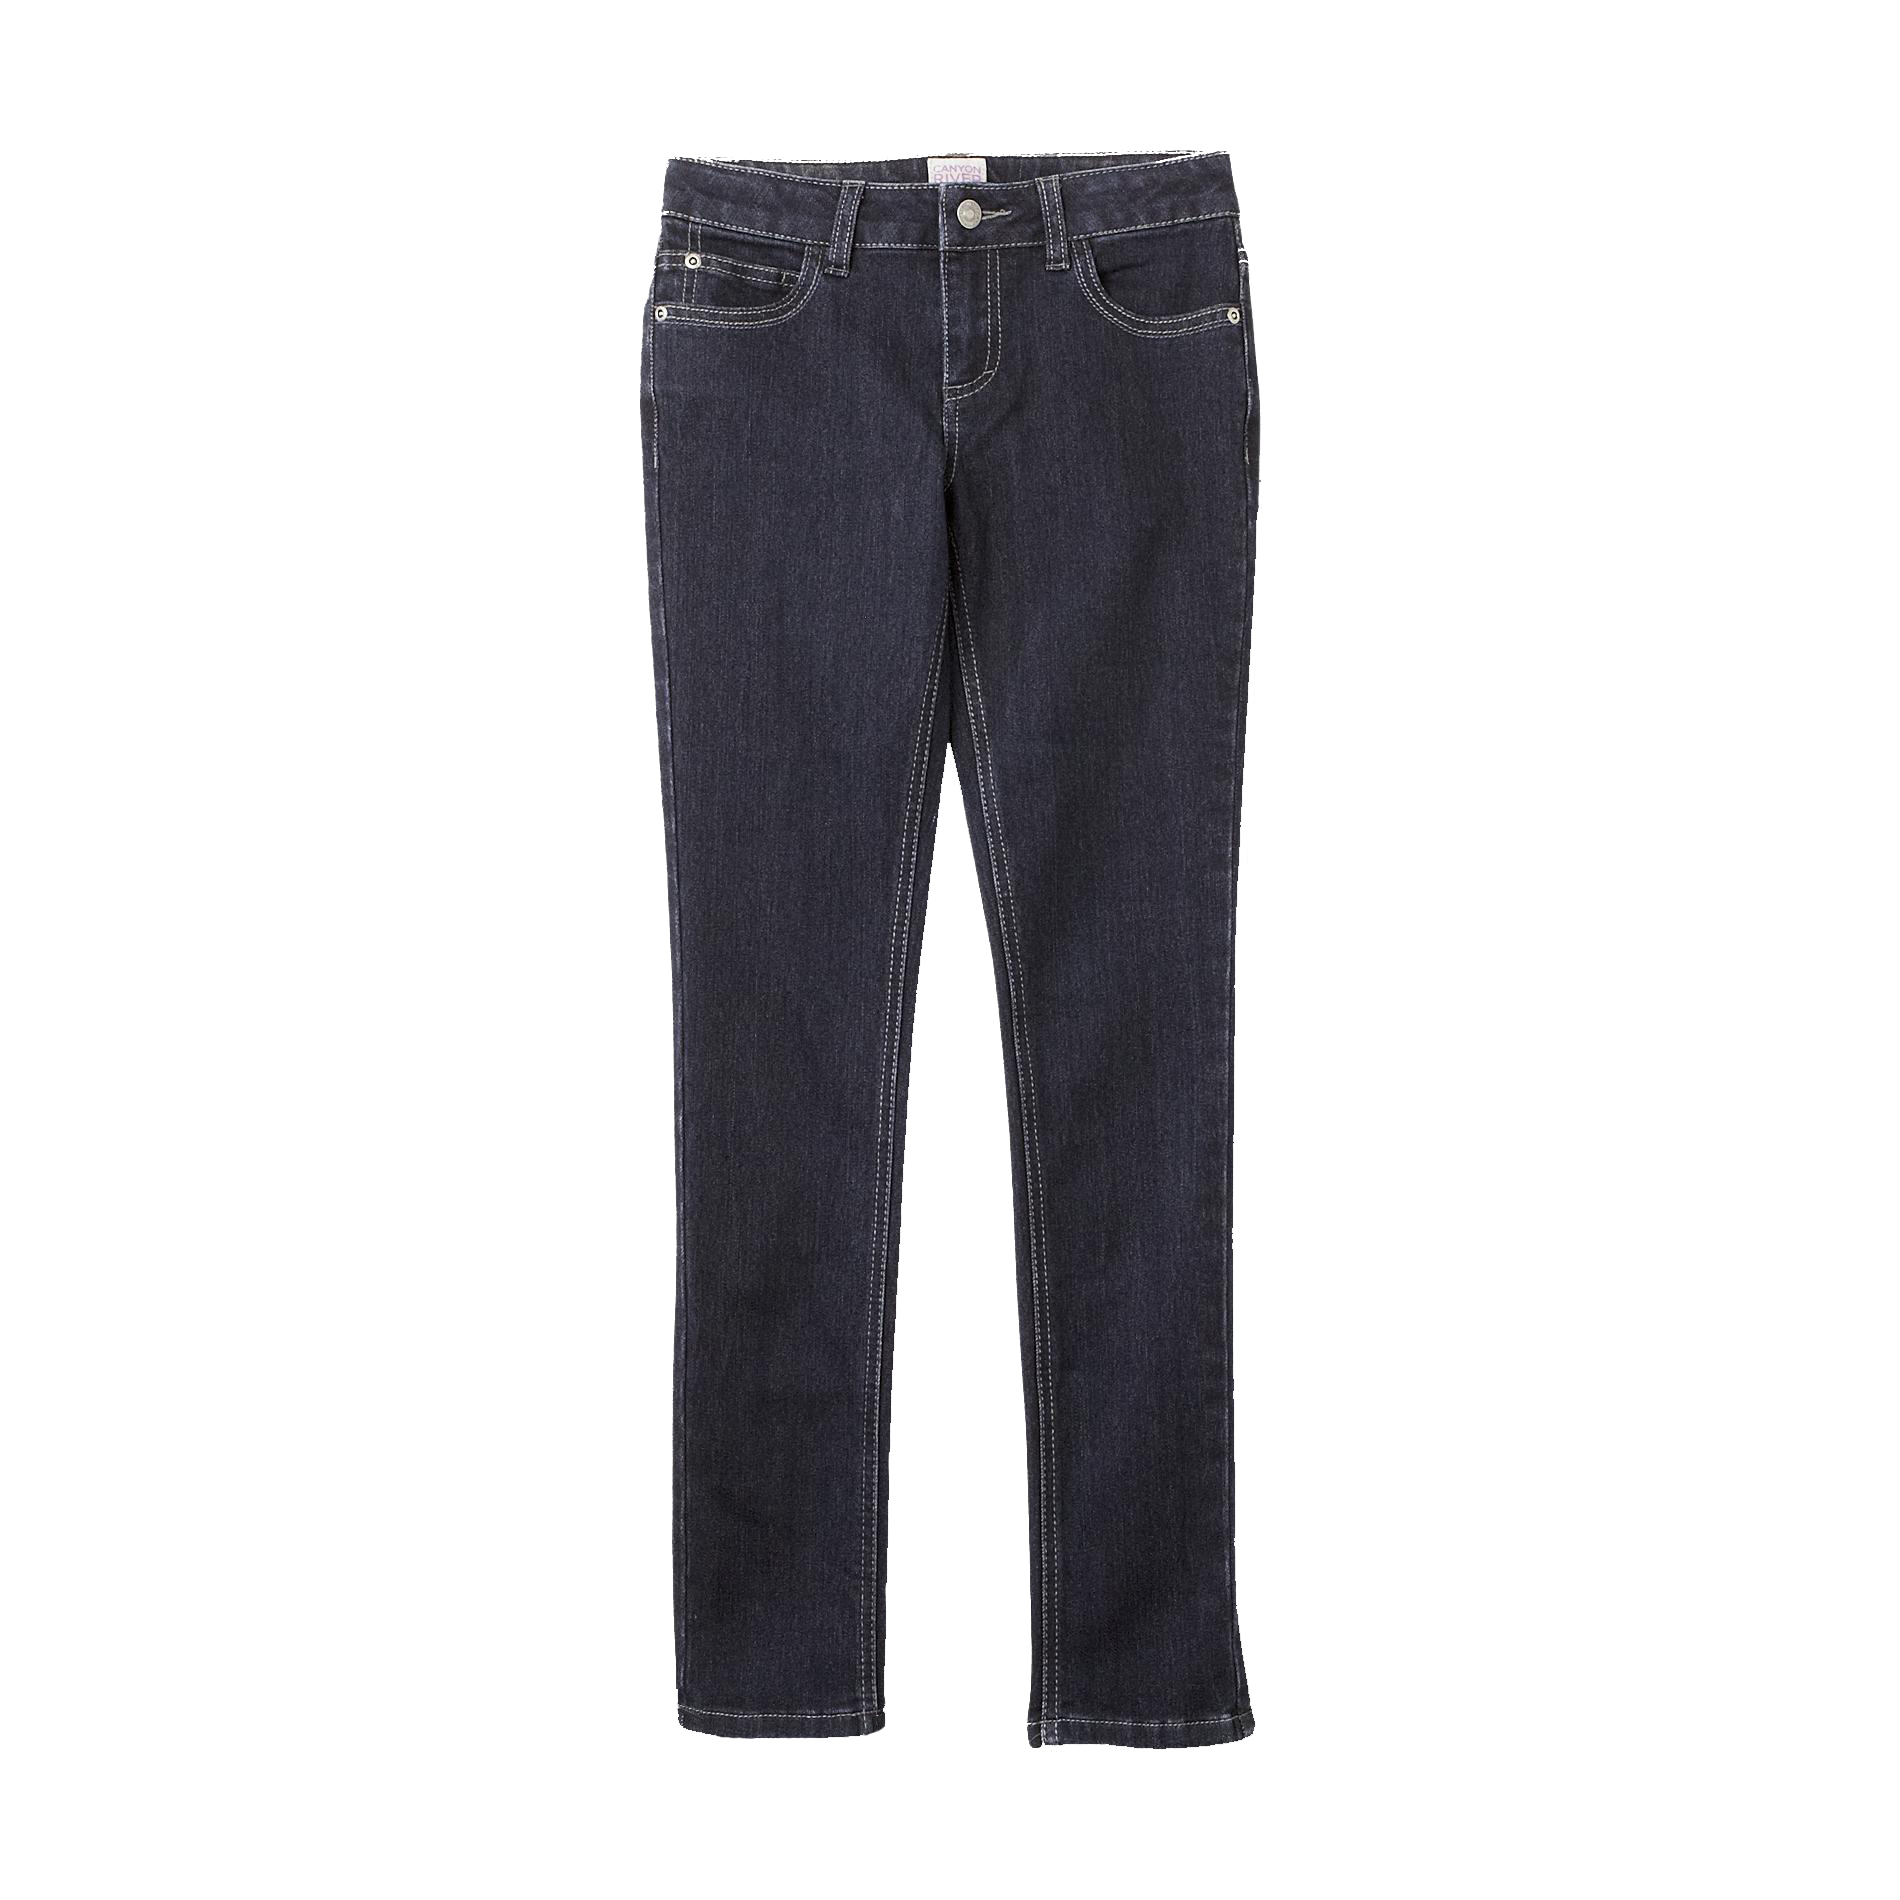 Canyon River Blues Girl's Skinny Jeans